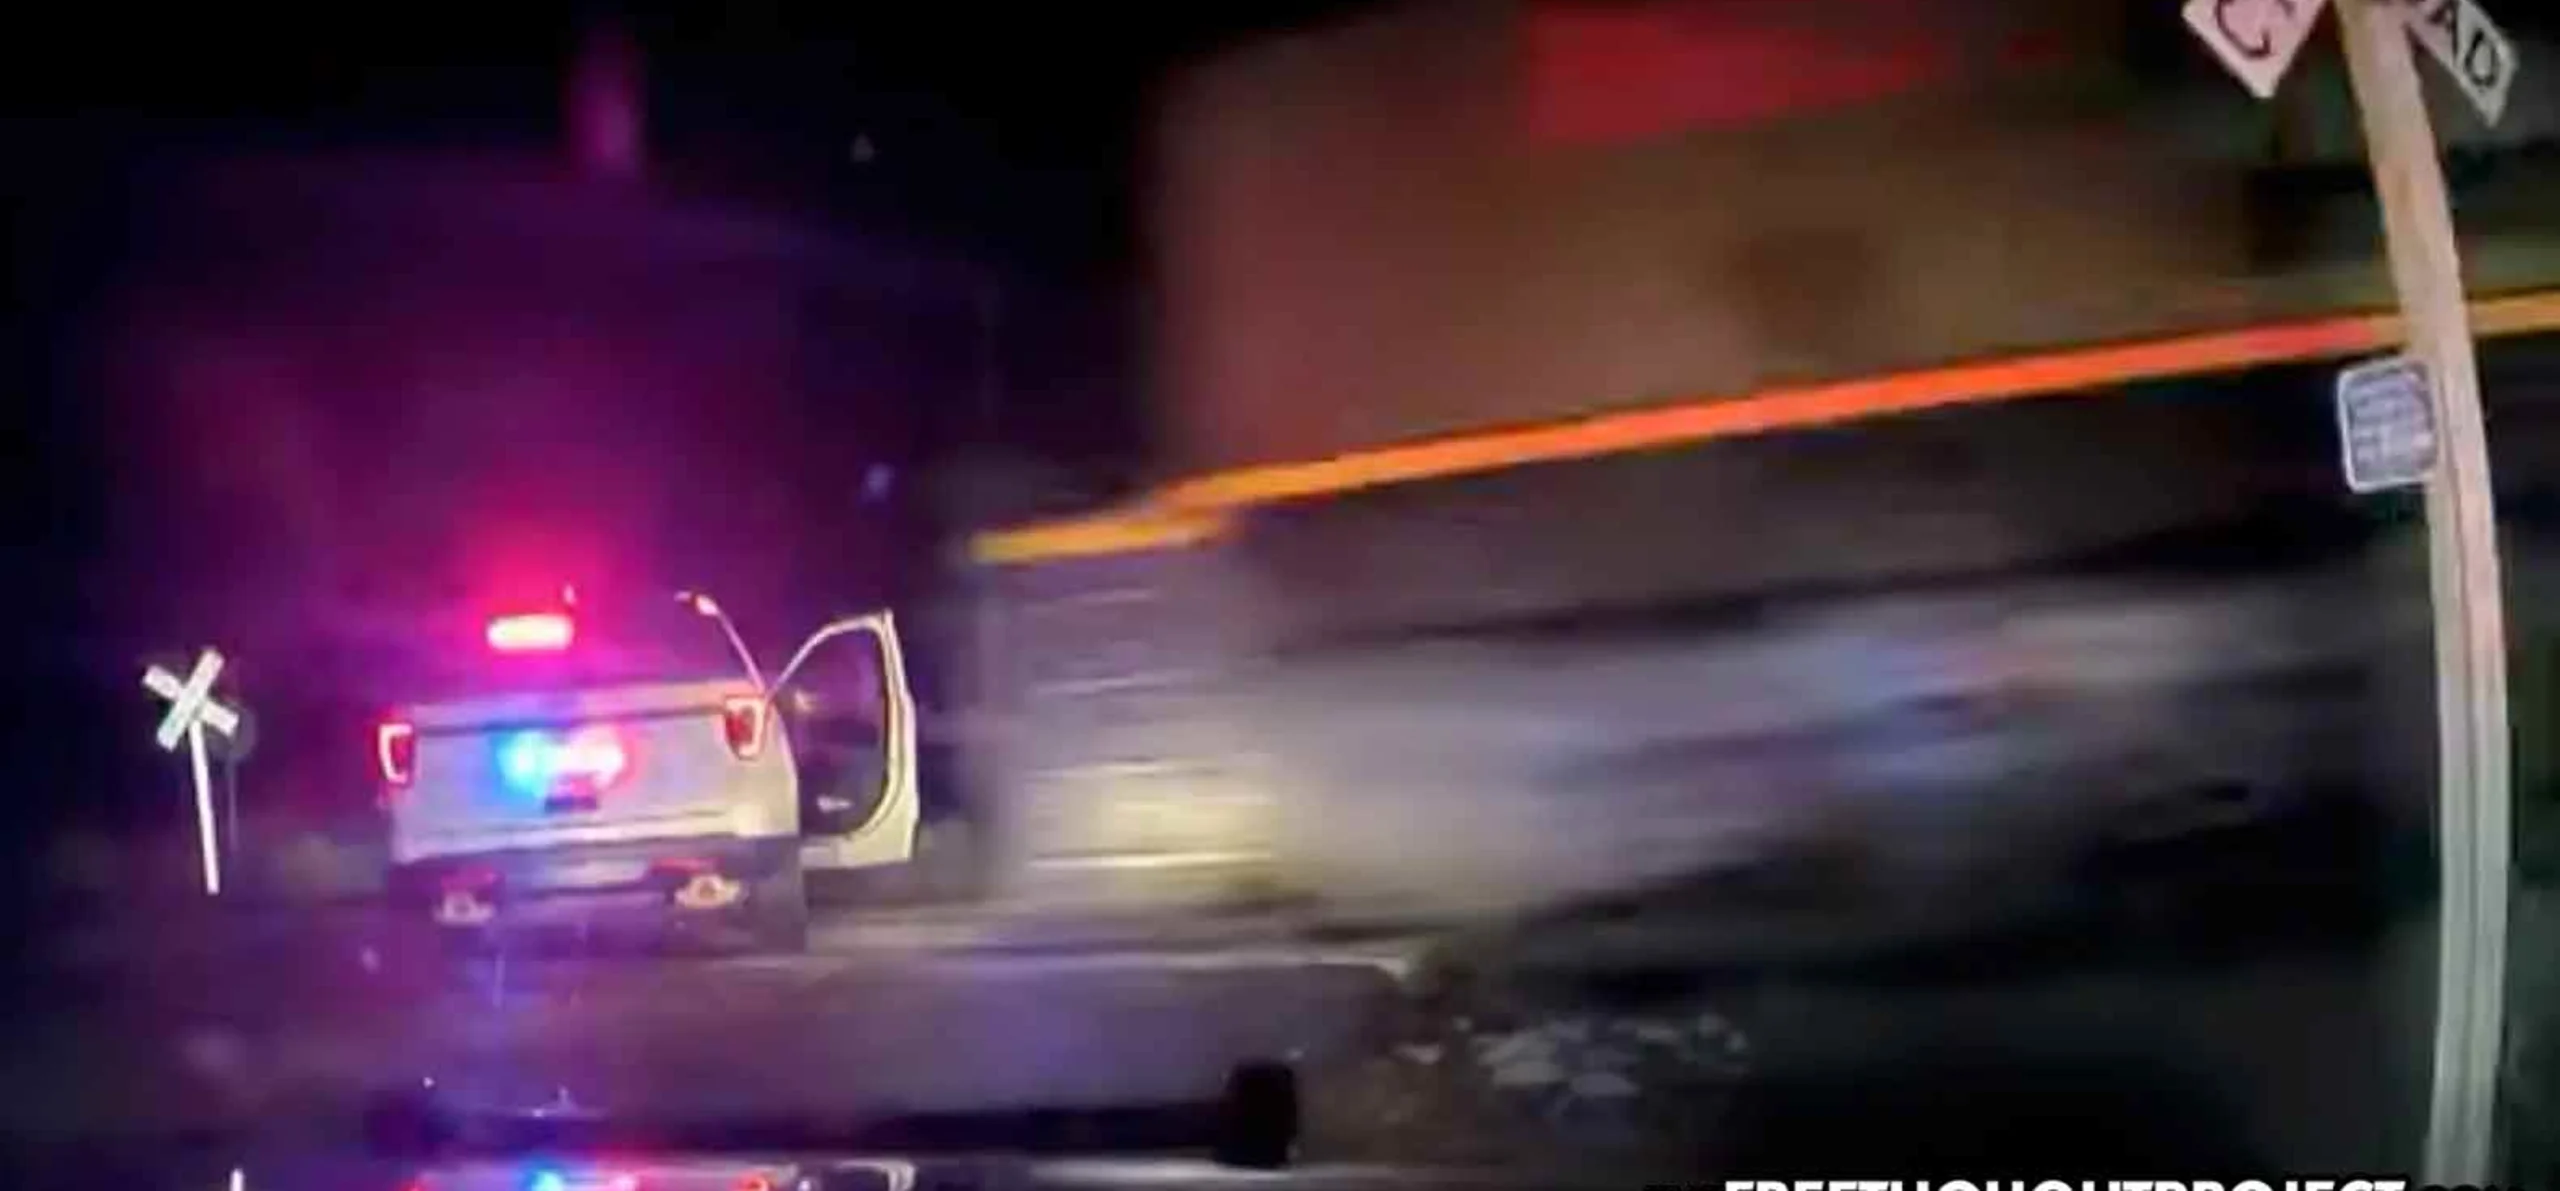 WATCH: Cops Lock Woman in Patrol Car Parked on Train Tracks Before a Train Plows Into It